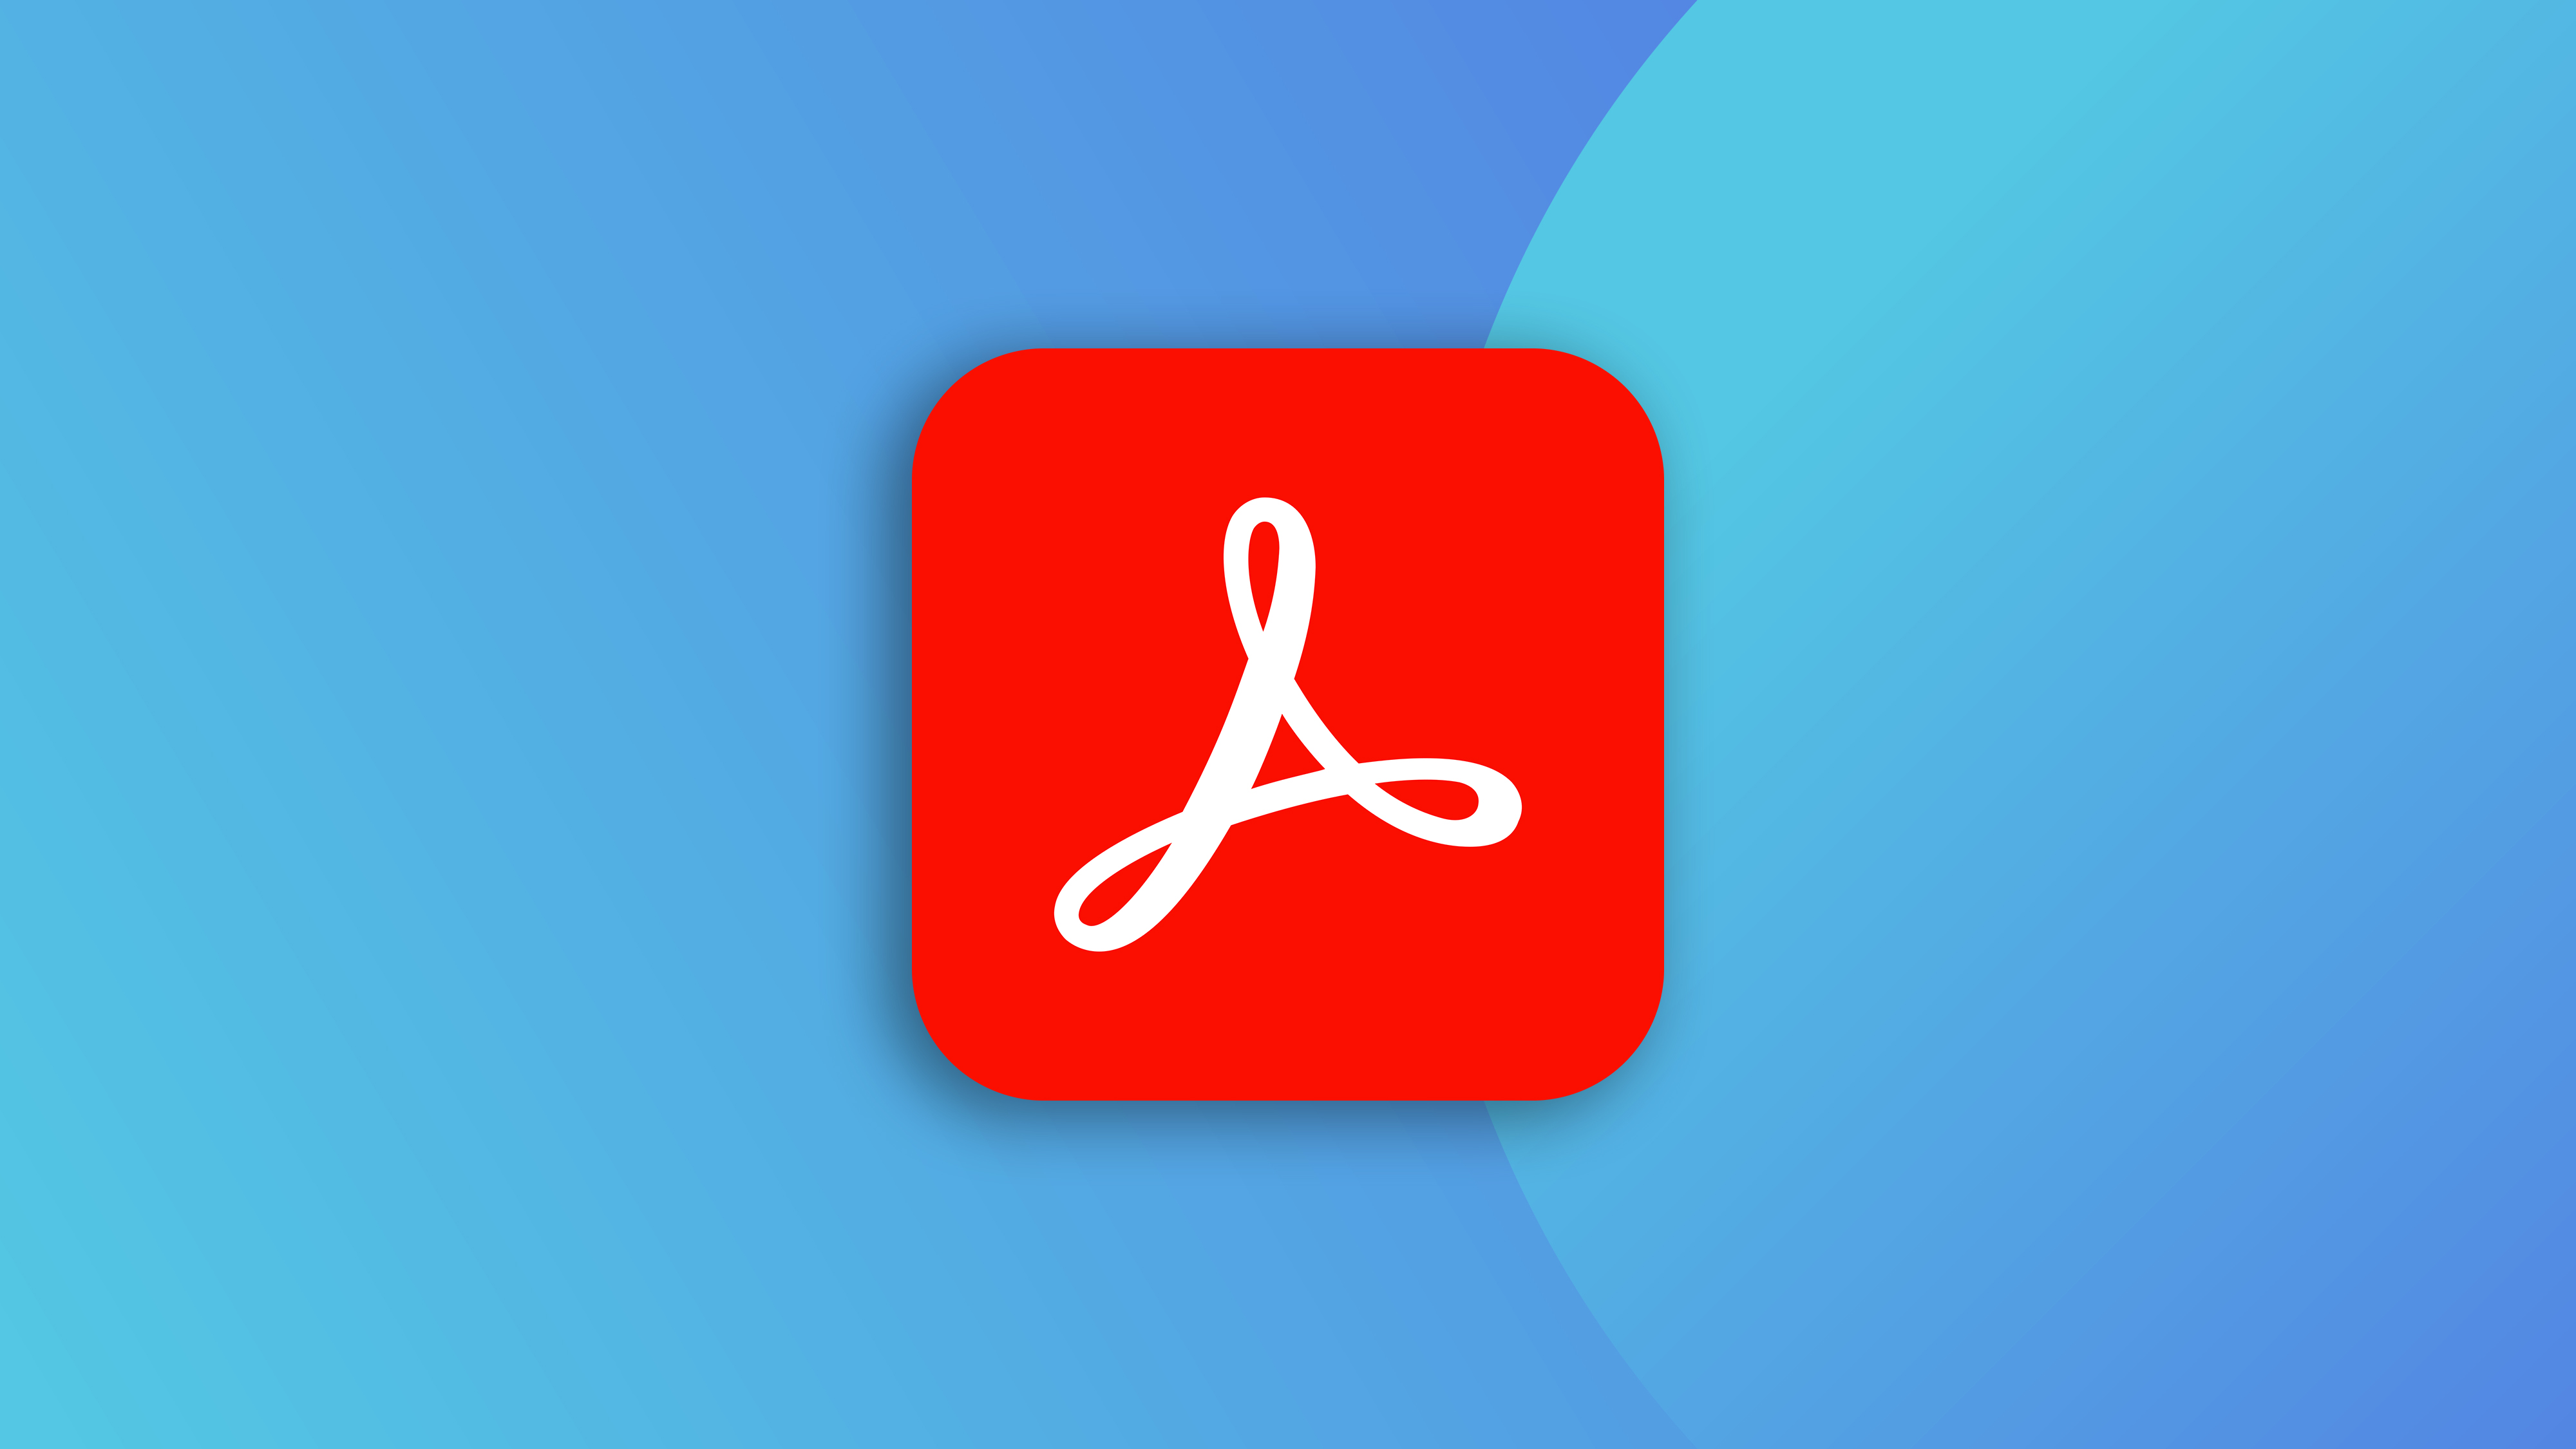 can i download adobe acrobat without creative cloud